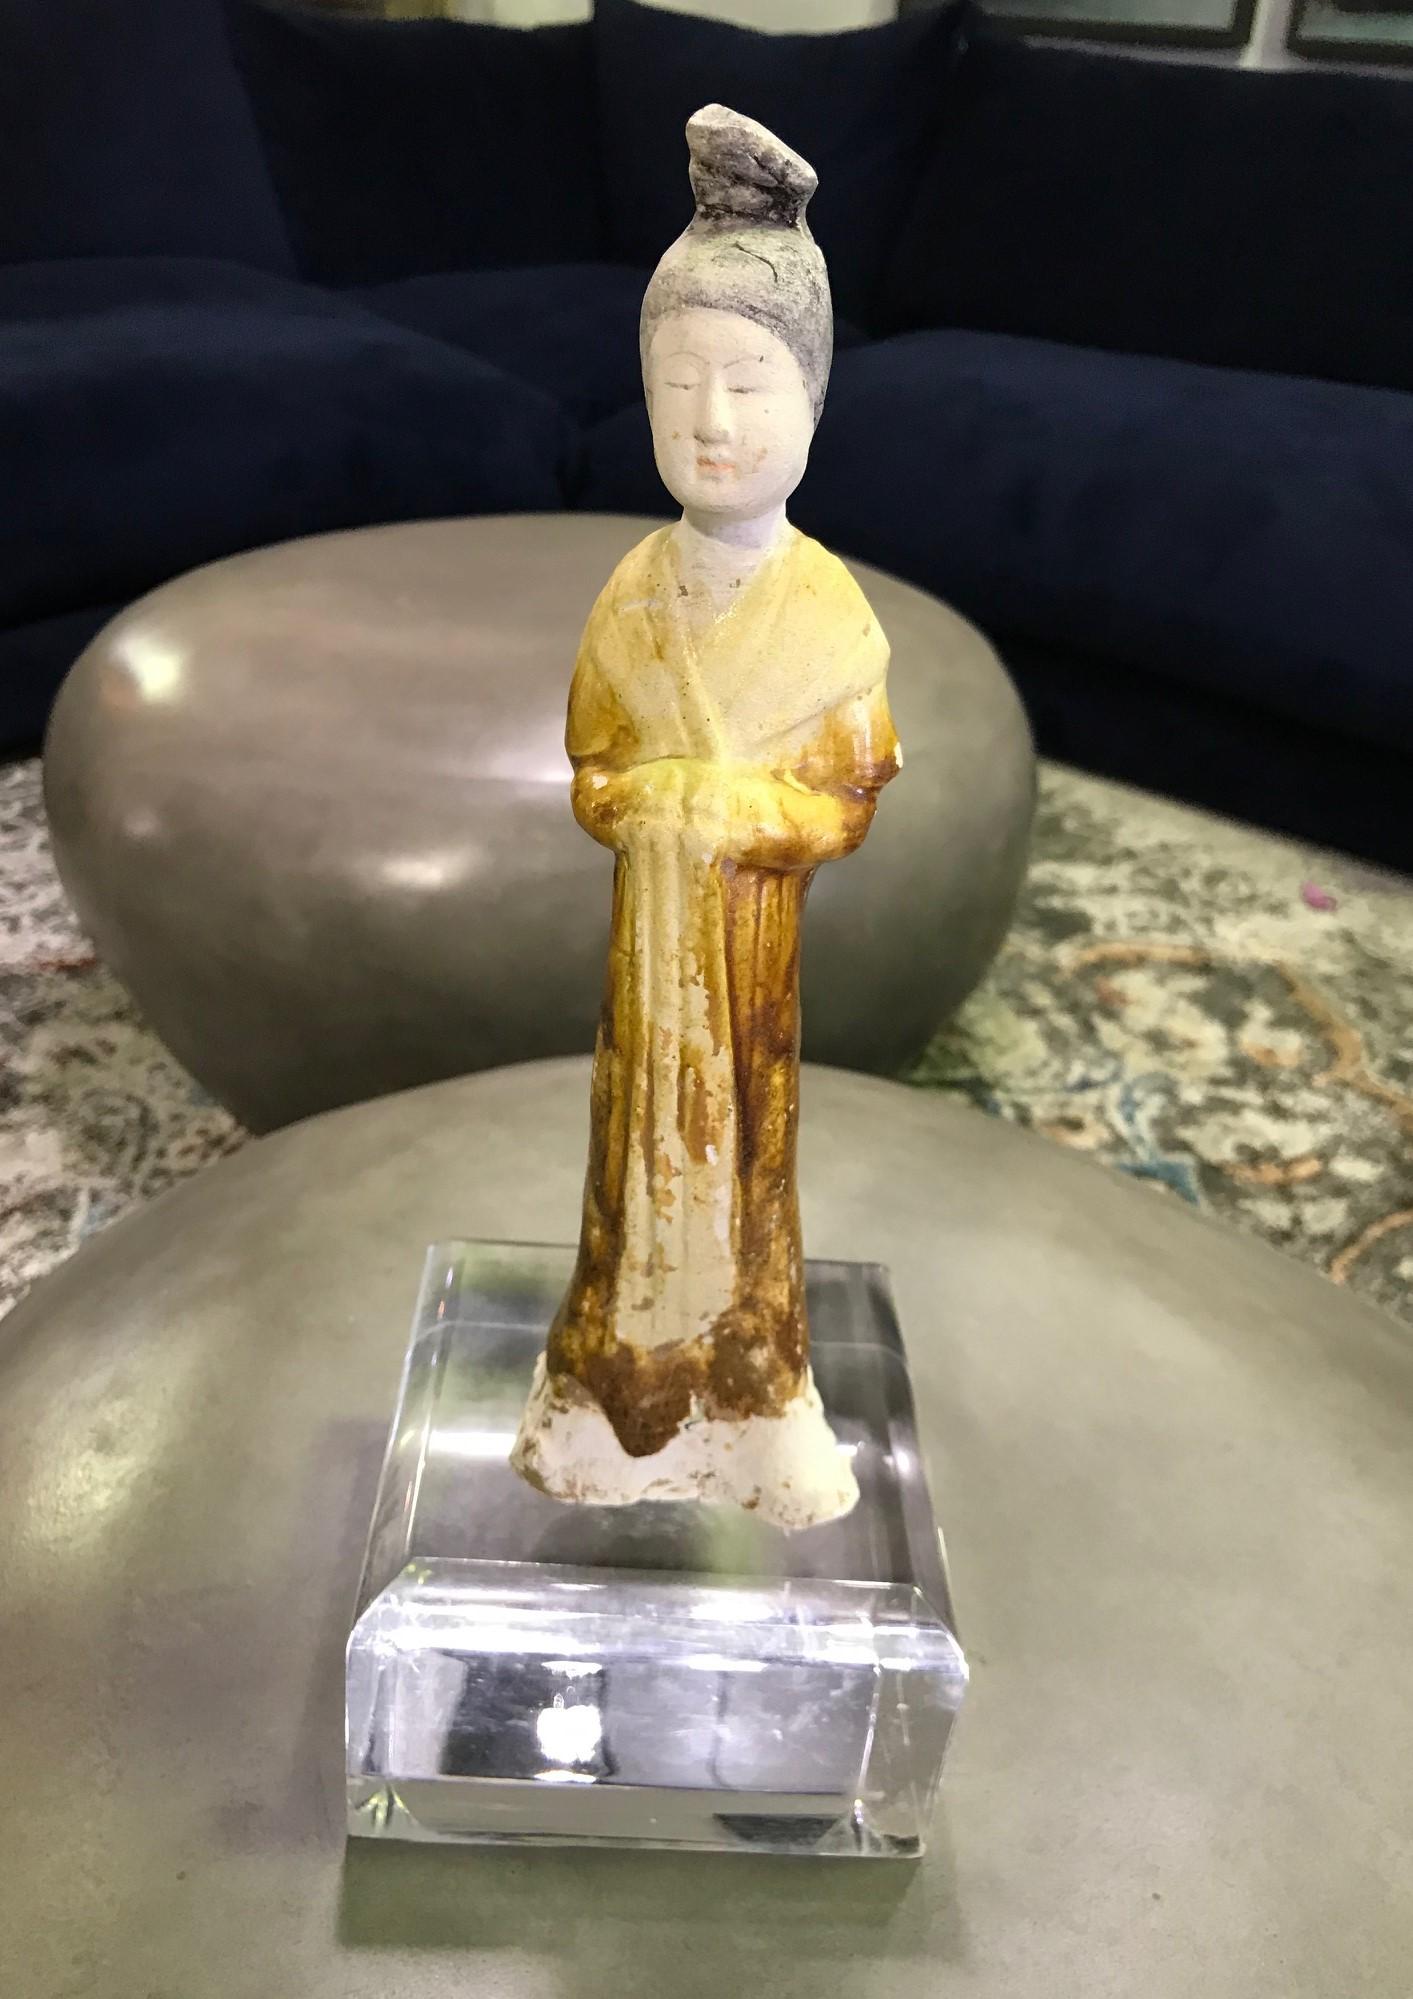 Simply gorgeous and so delicately and beautifully made. This work has been molded in a whitish, dense terra cotta, typical of the region of the capital of Luoyang, and then attractively glazed over with various yellow, green, brown, amber, colored